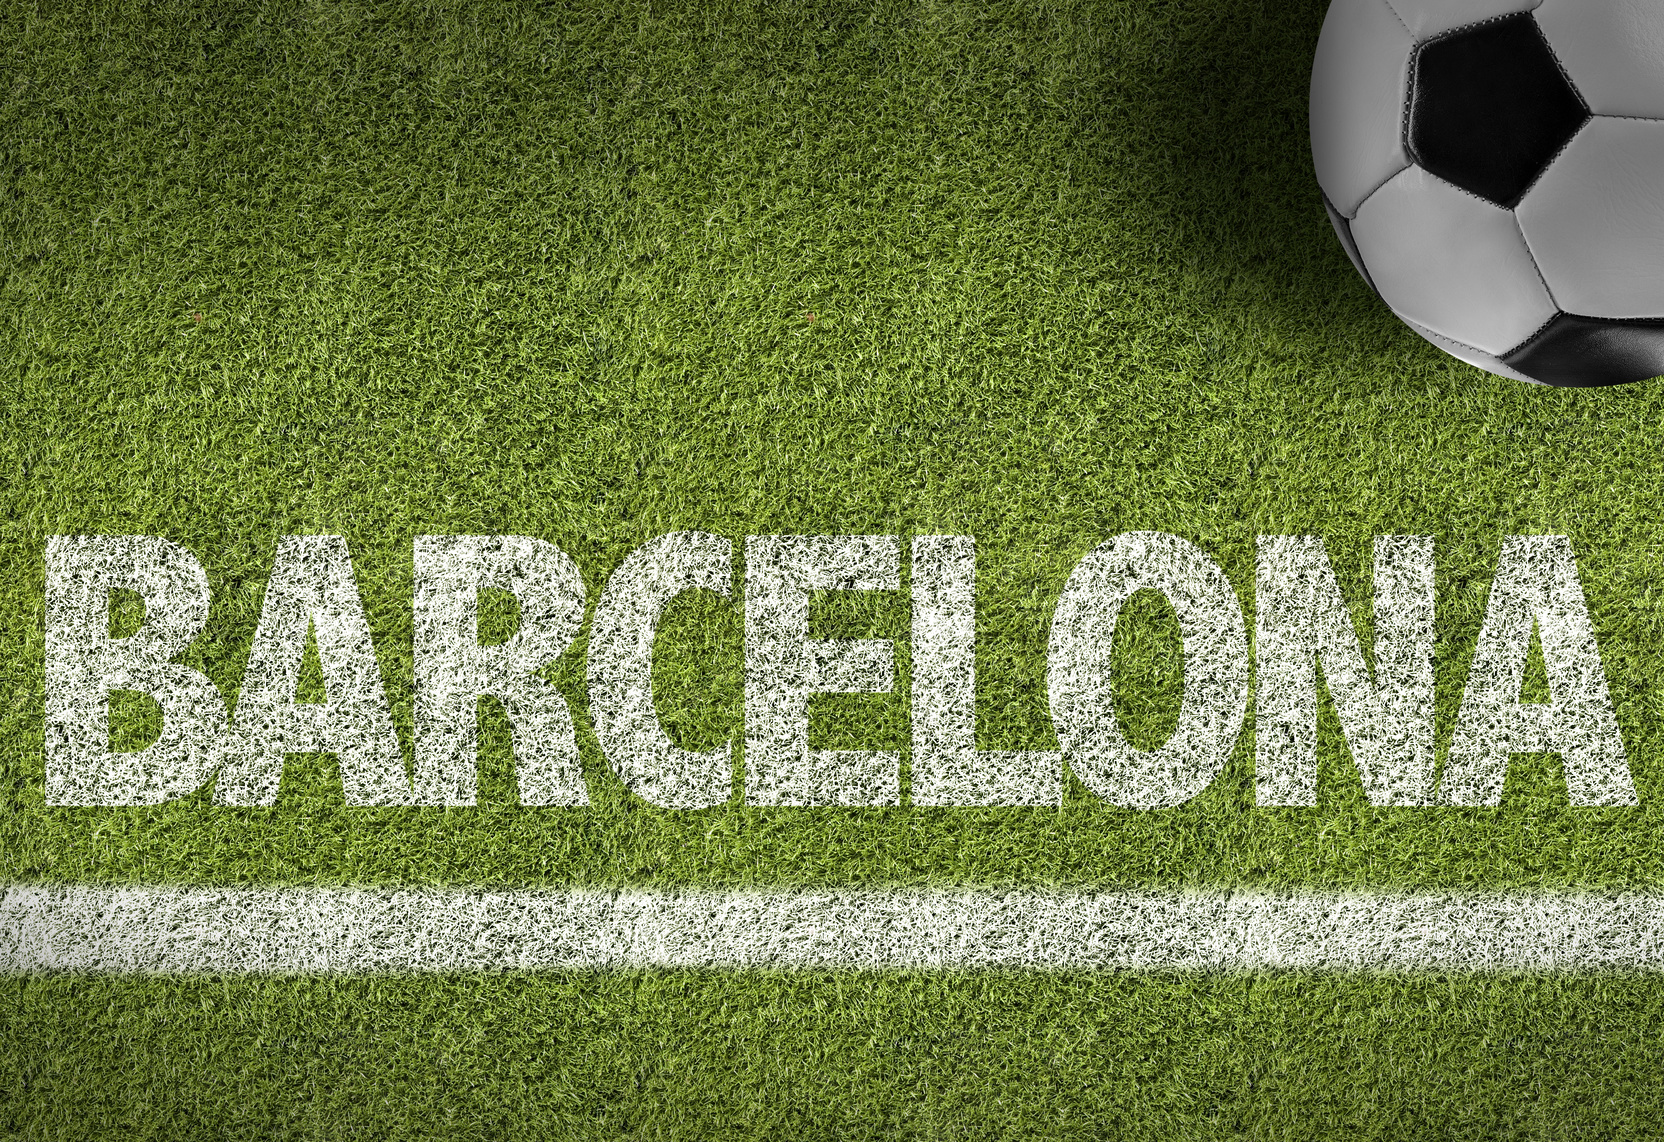 Soccer field with the text: Barcelona